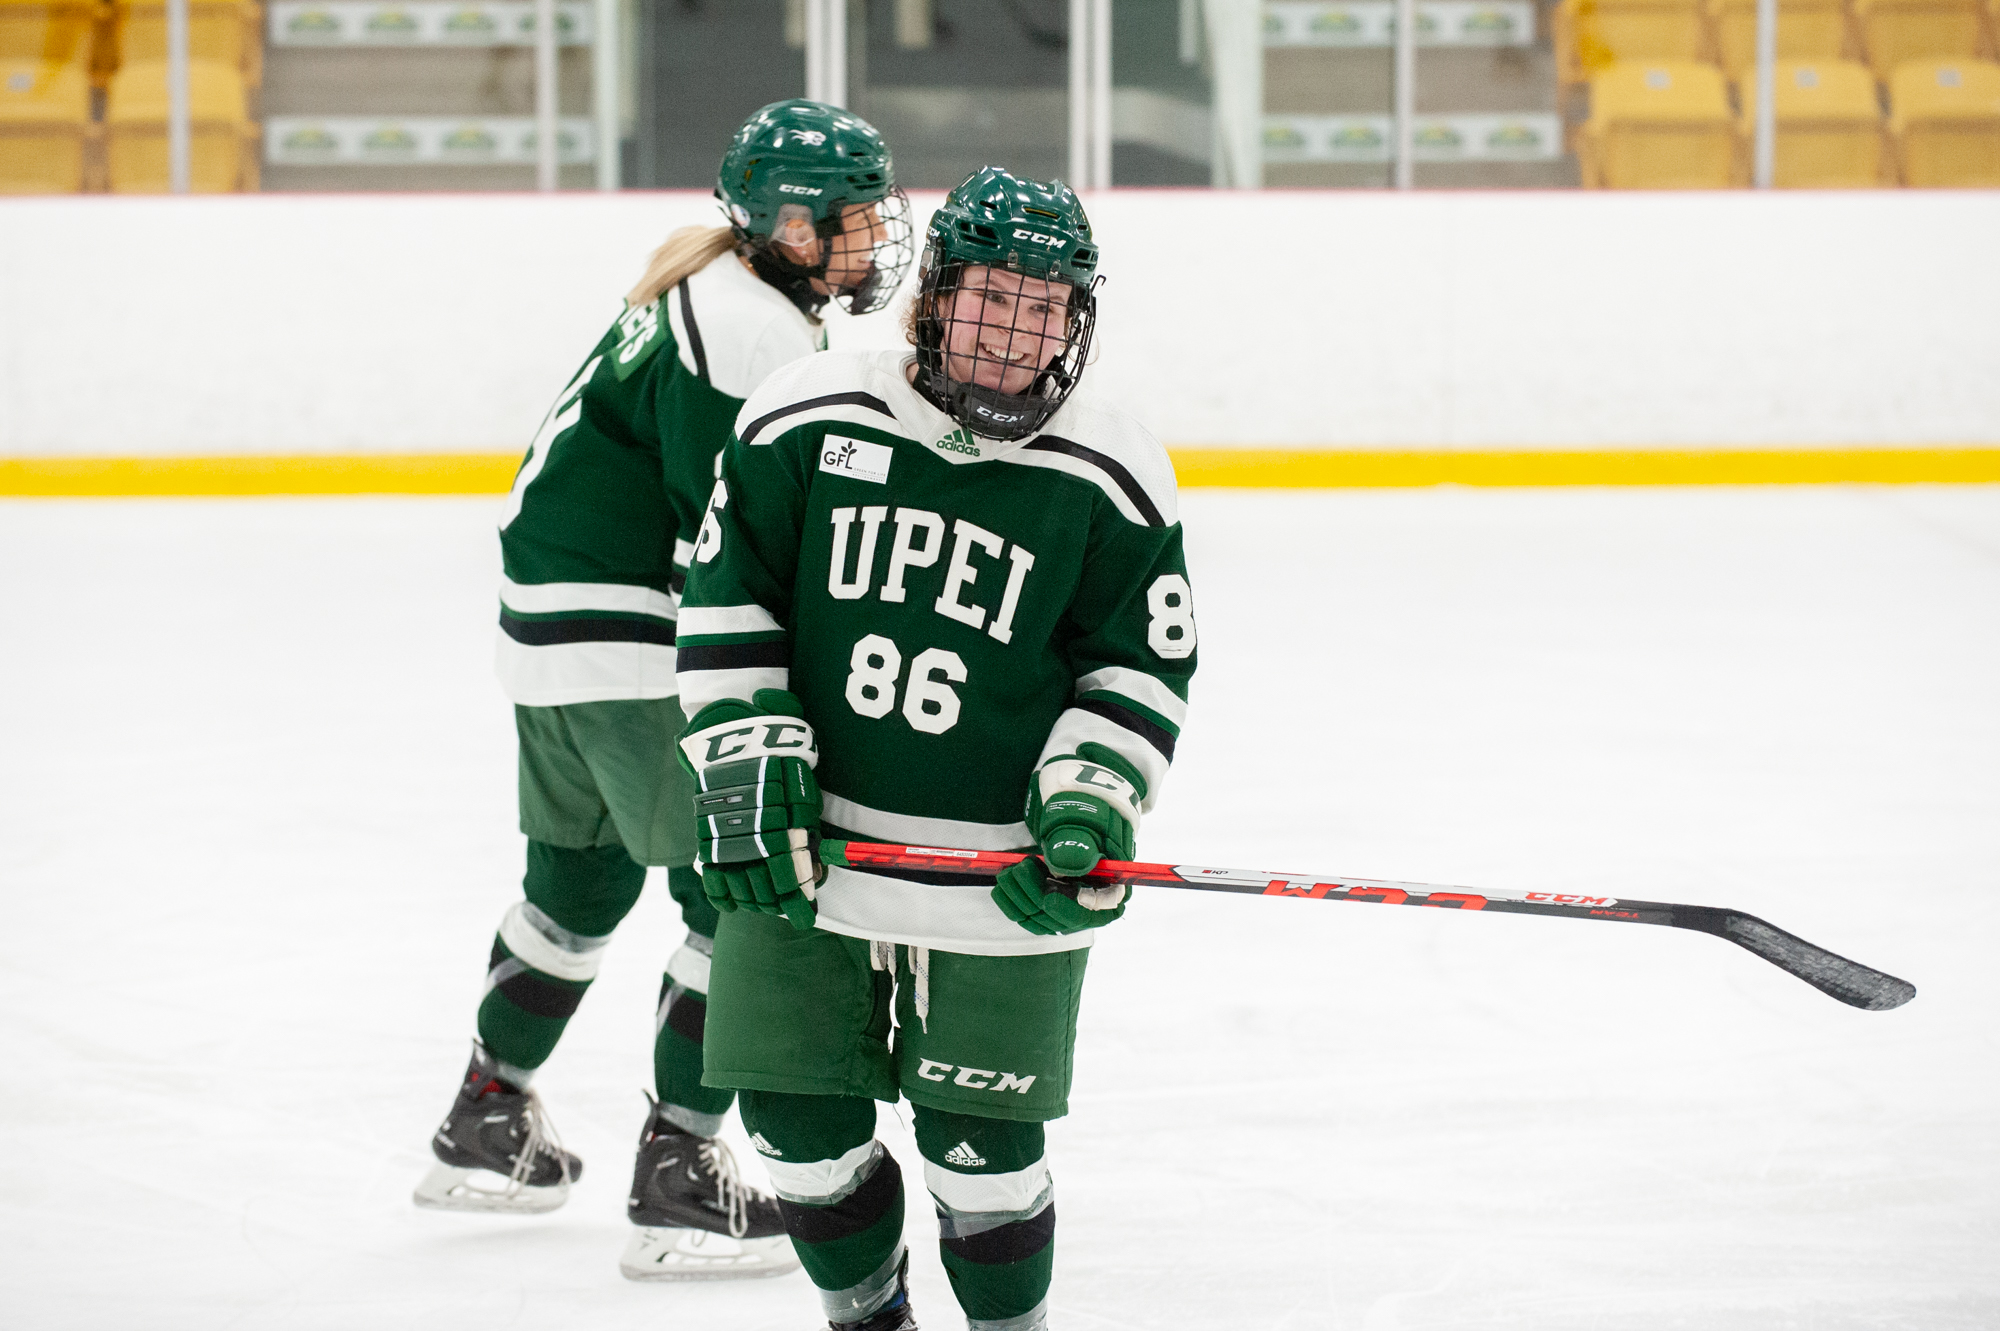 UPEI win second shootout in a row, sweep weekend